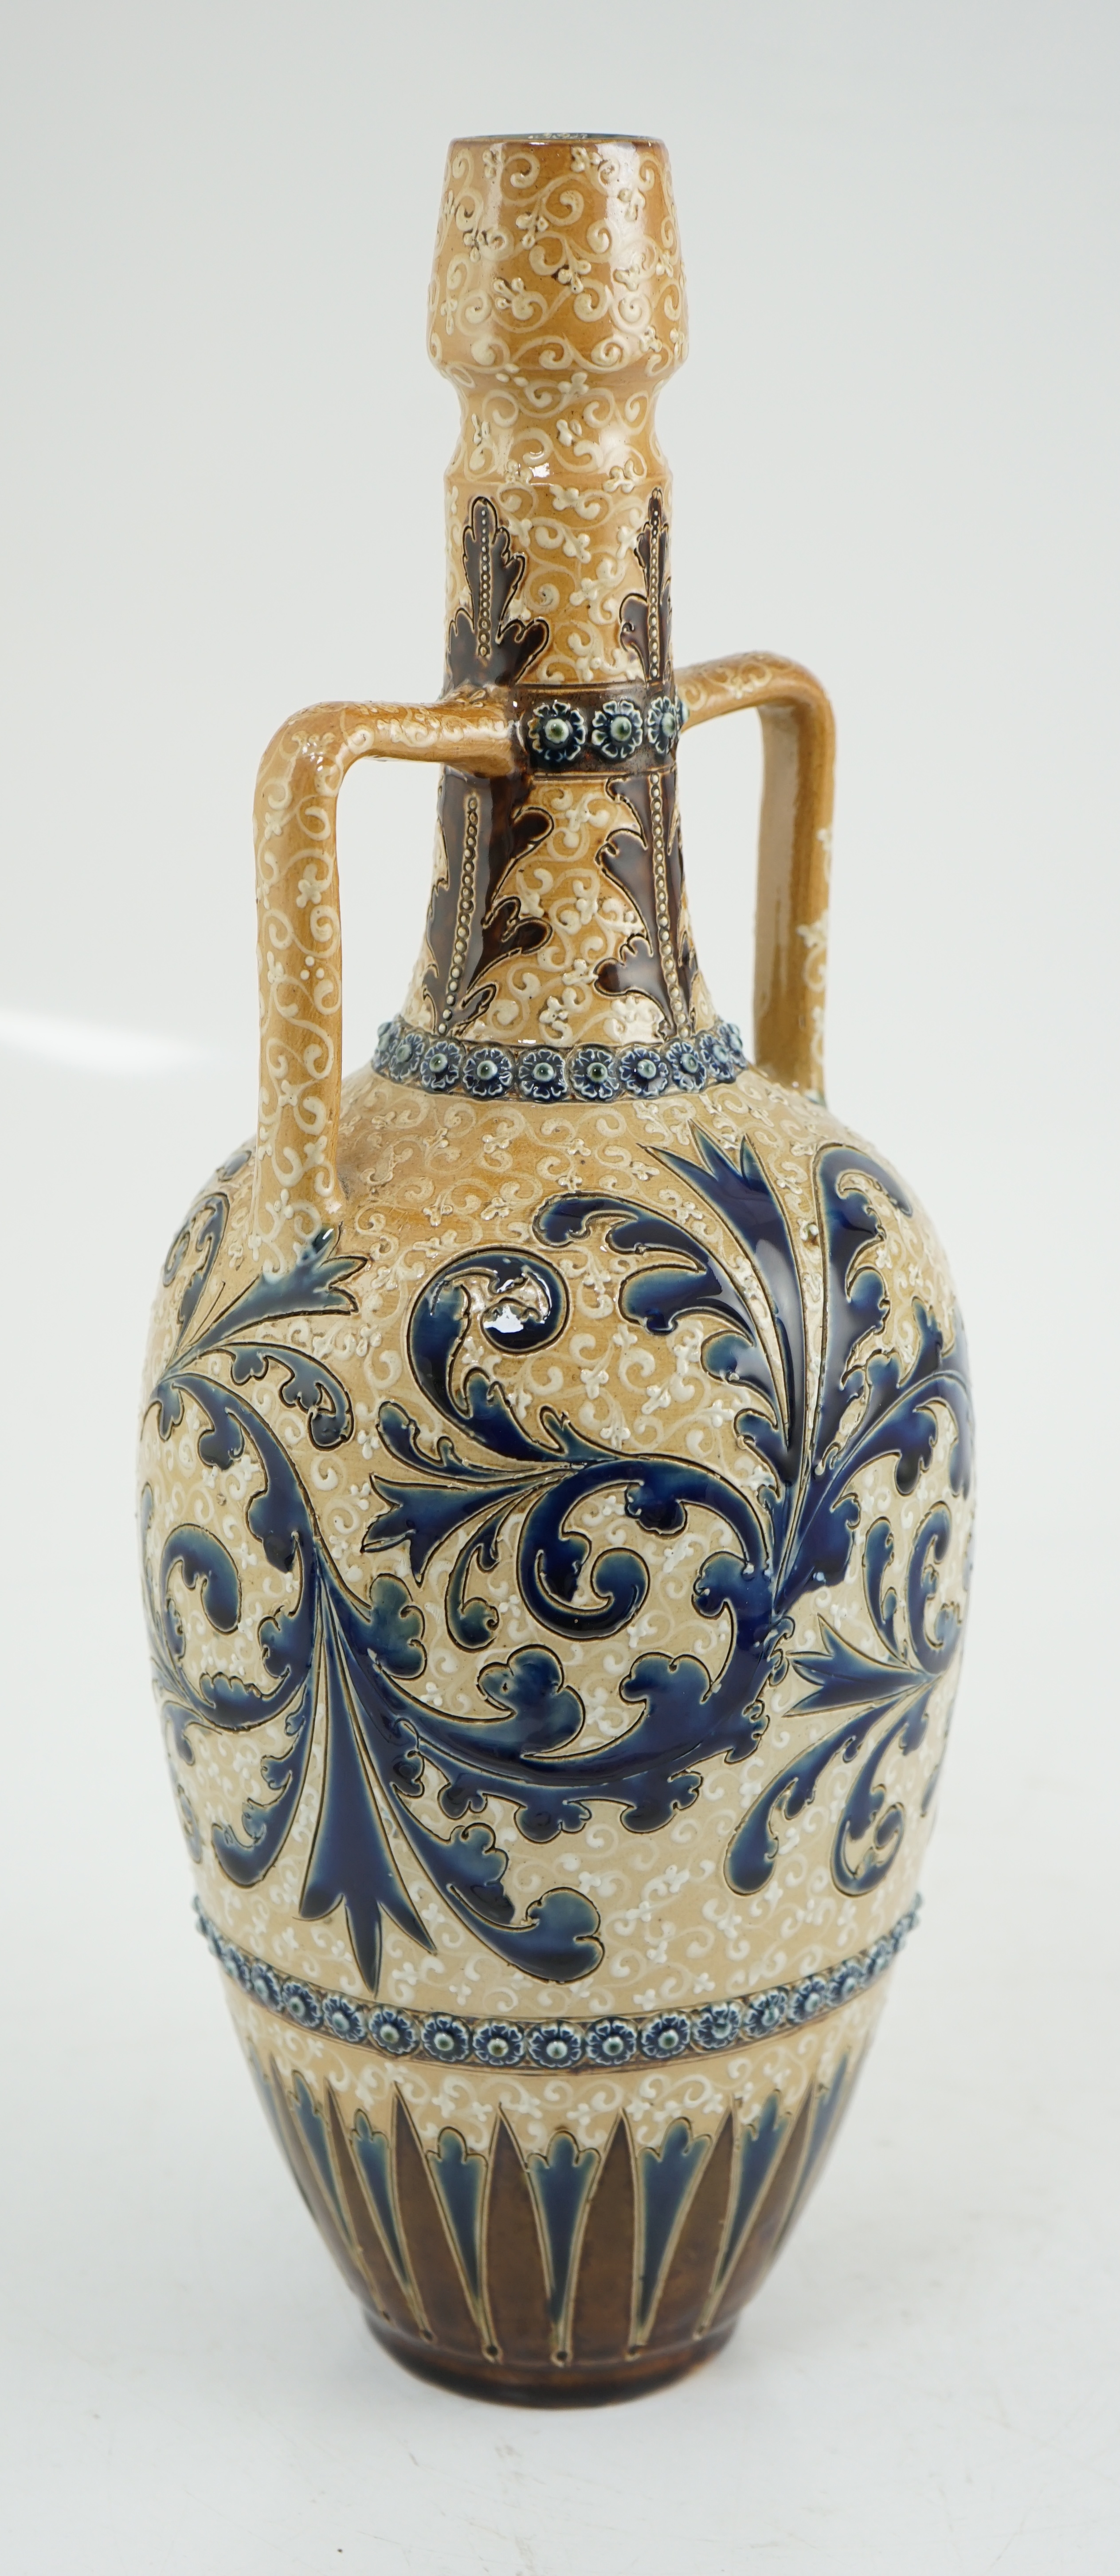 George Tinworth for Doulton Lambeth, a large stoneware vase, with scrolling blue foliate decoration, monogrammed and dated 1884, 40cm high. Condition - good